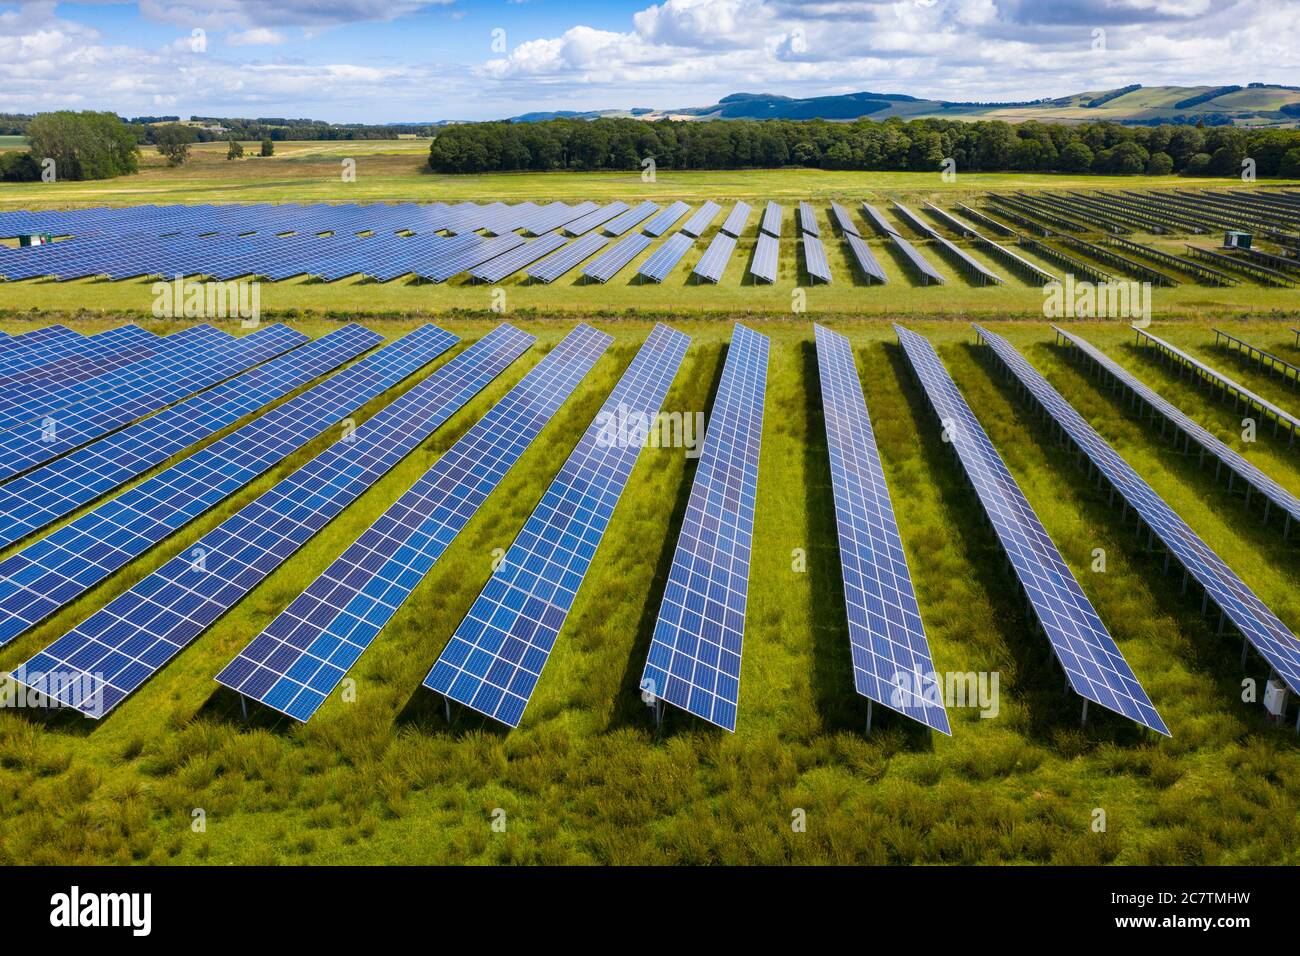 Aerial view of Errol solar farm near Perth in Scotland, UK. Operated by Elgin Energy it is largest solar farm in Scotland generating 13MW from 55,000 Stock Photo